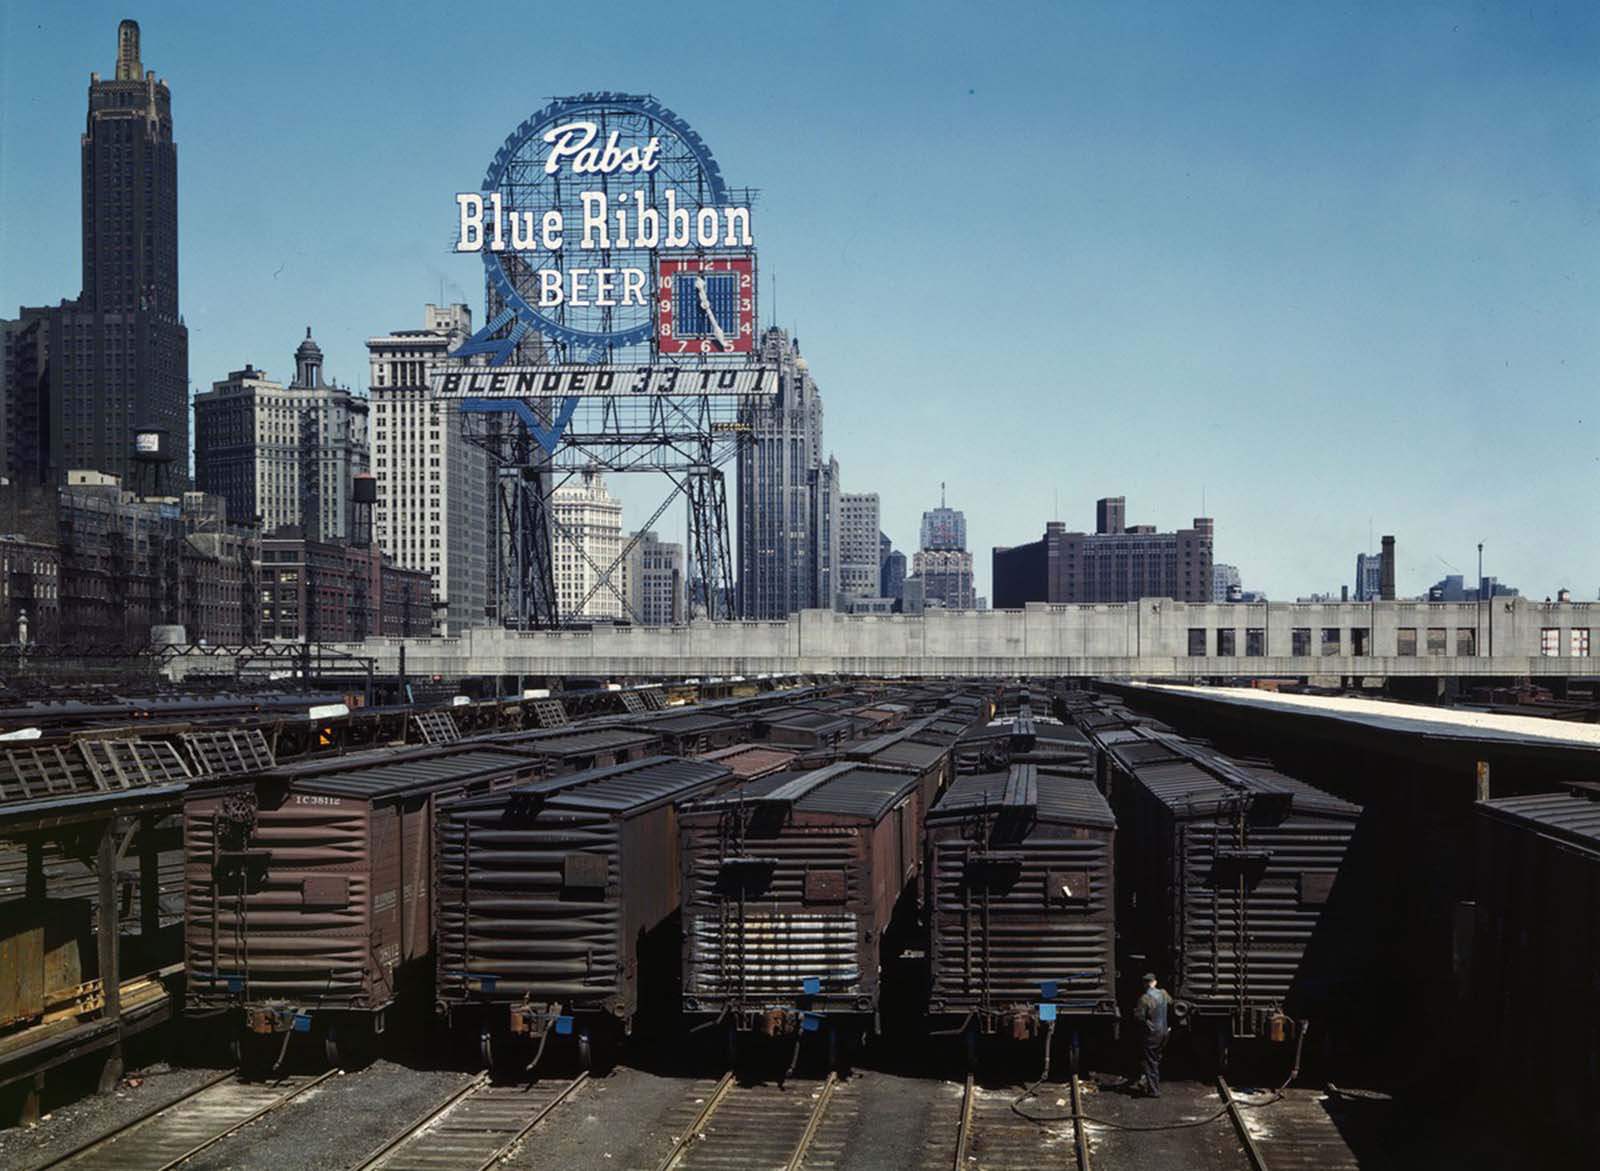 A view of part of the South Water Street freight depot of the Illinois Central Railroad and buildings in downtown Chicago on May 1, 1943.